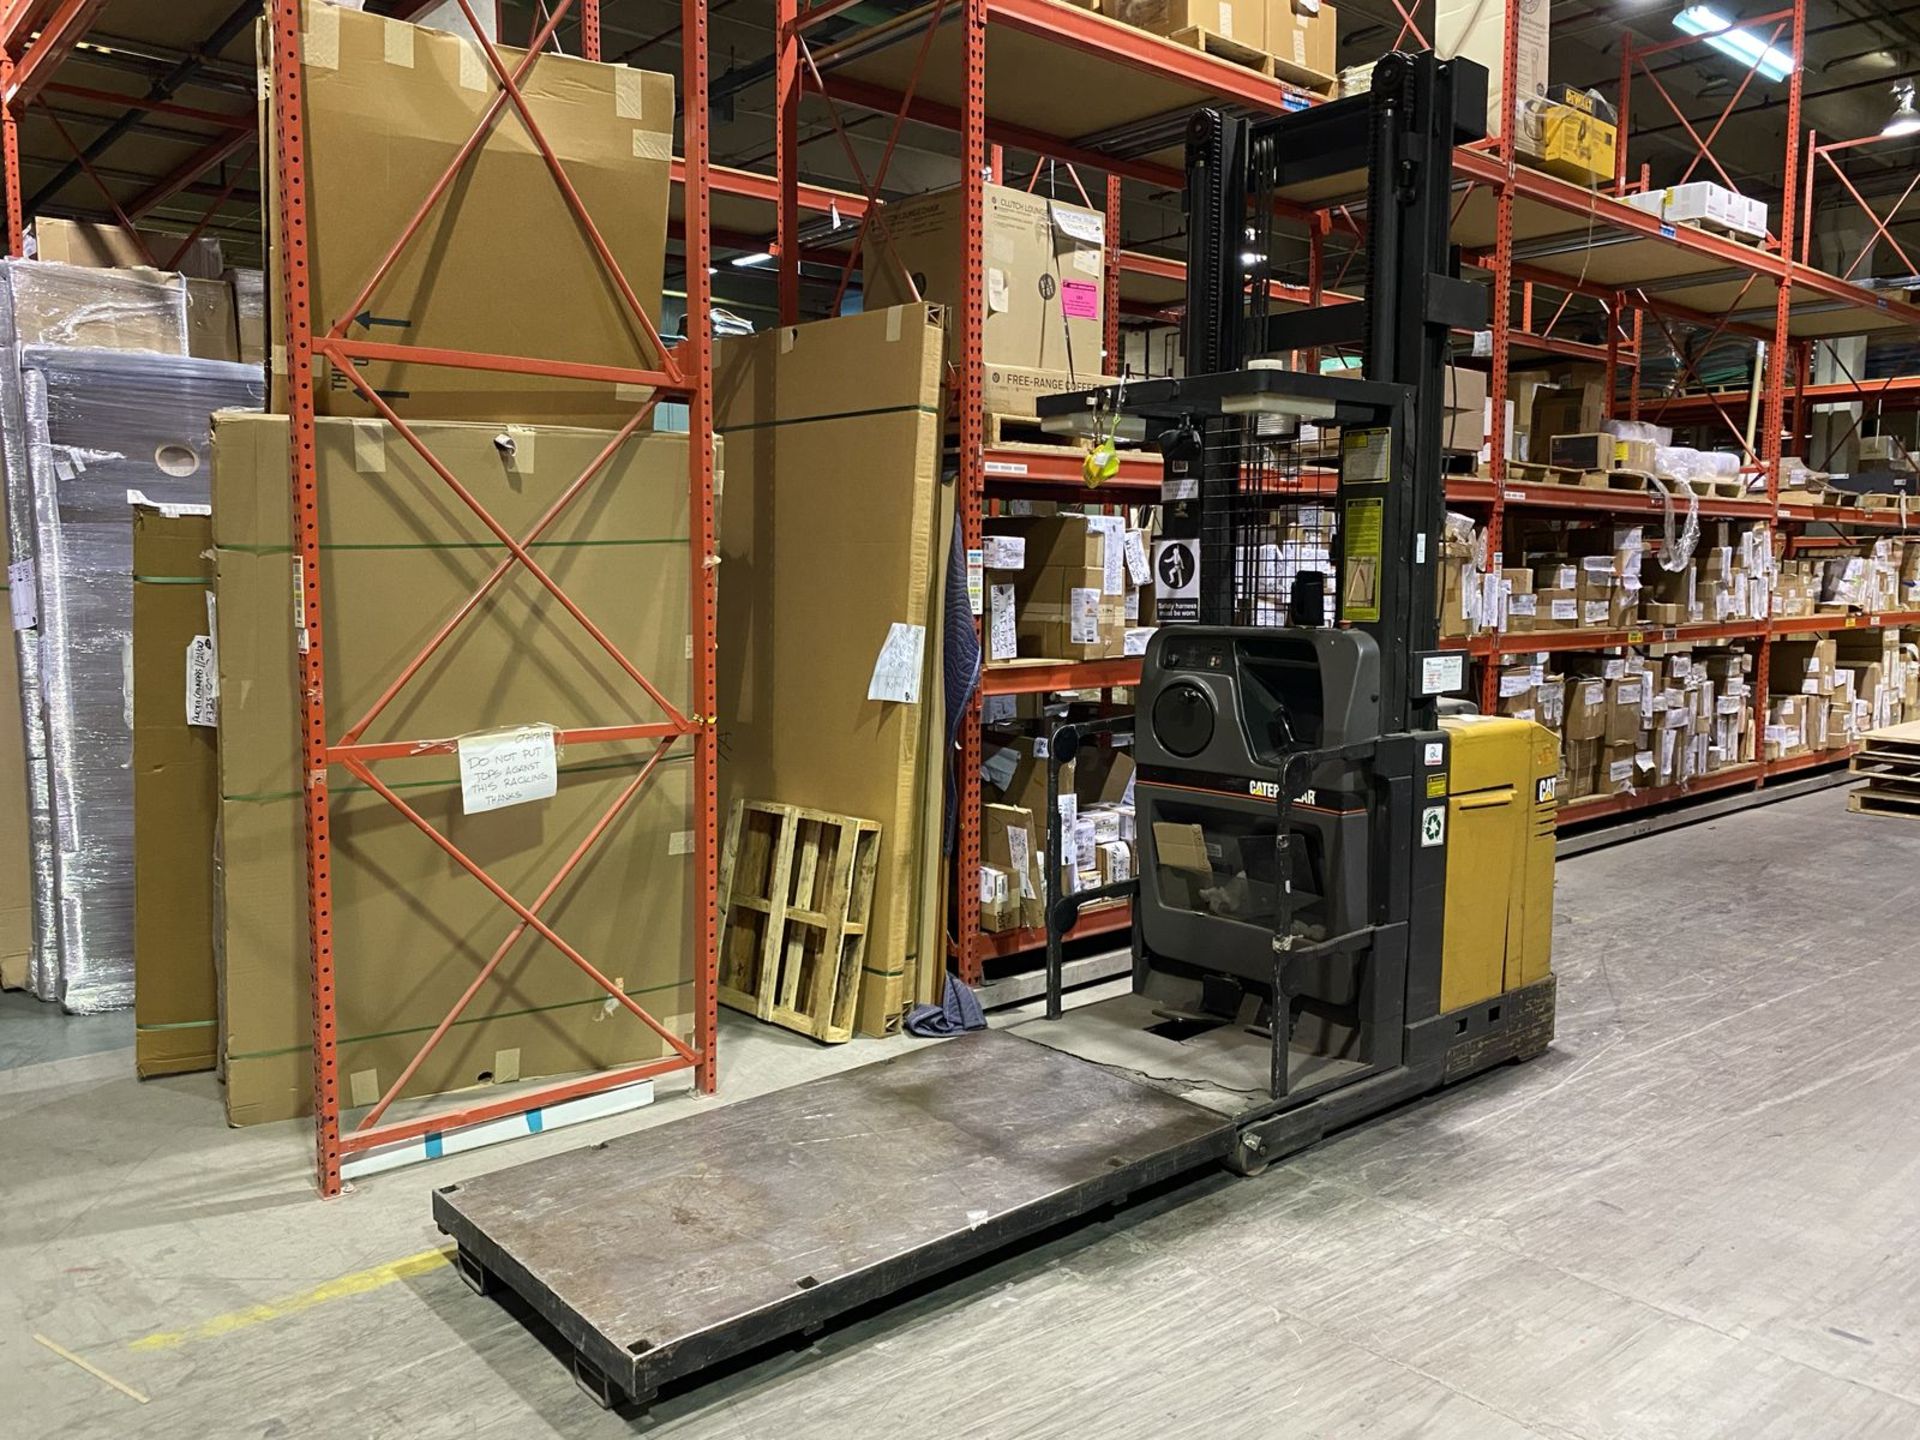 CATERPILLAR NOR30P ELECTRIC ORDER PICKER LIFT W/ 3,000LBS CAP, 201" LIFT (126" RESTING HEIGHT), - Image 3 of 7